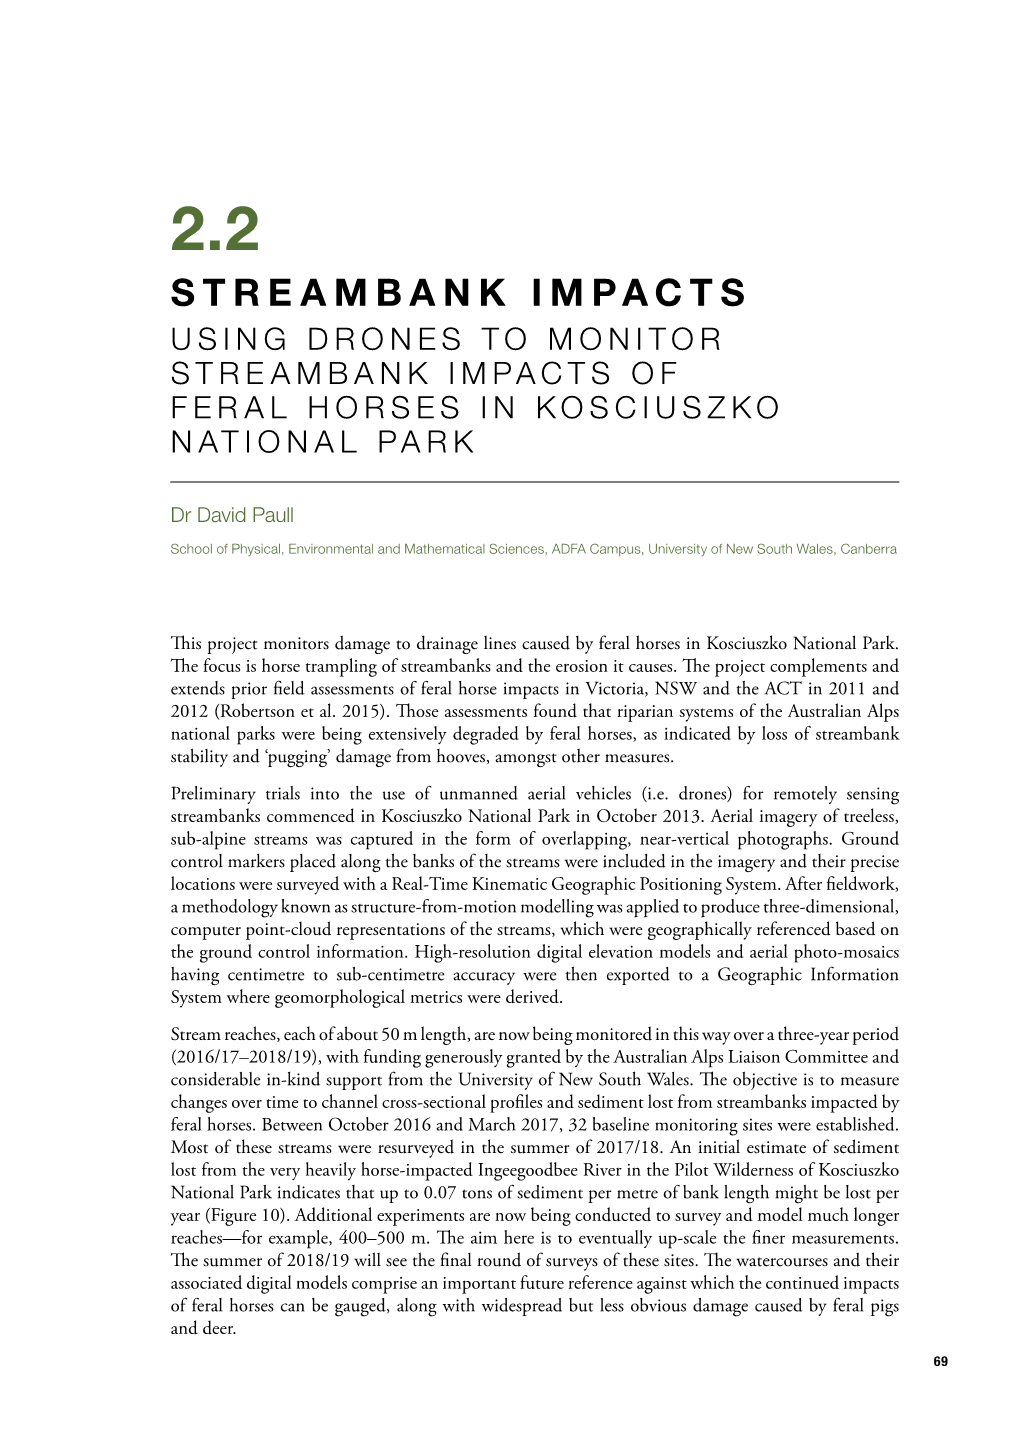 Streambank Impacts Using Drones to Monitor Streambank Impacts of Feral Horses in Kosciuszko National Park